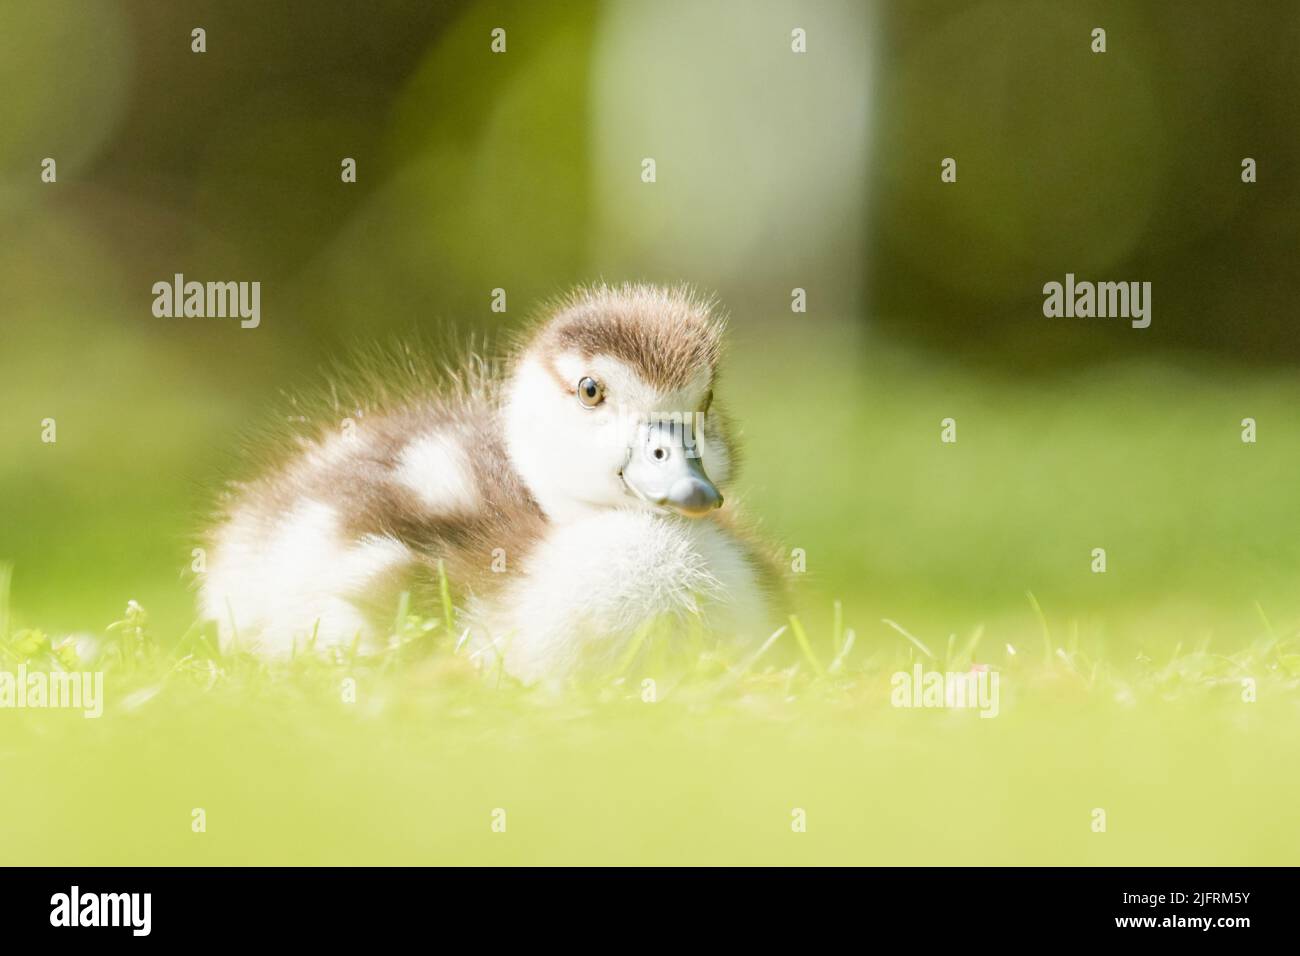 A shallow focus shot of an Egyptian goose gosling sitting on the grass with blurred background Stock Photo